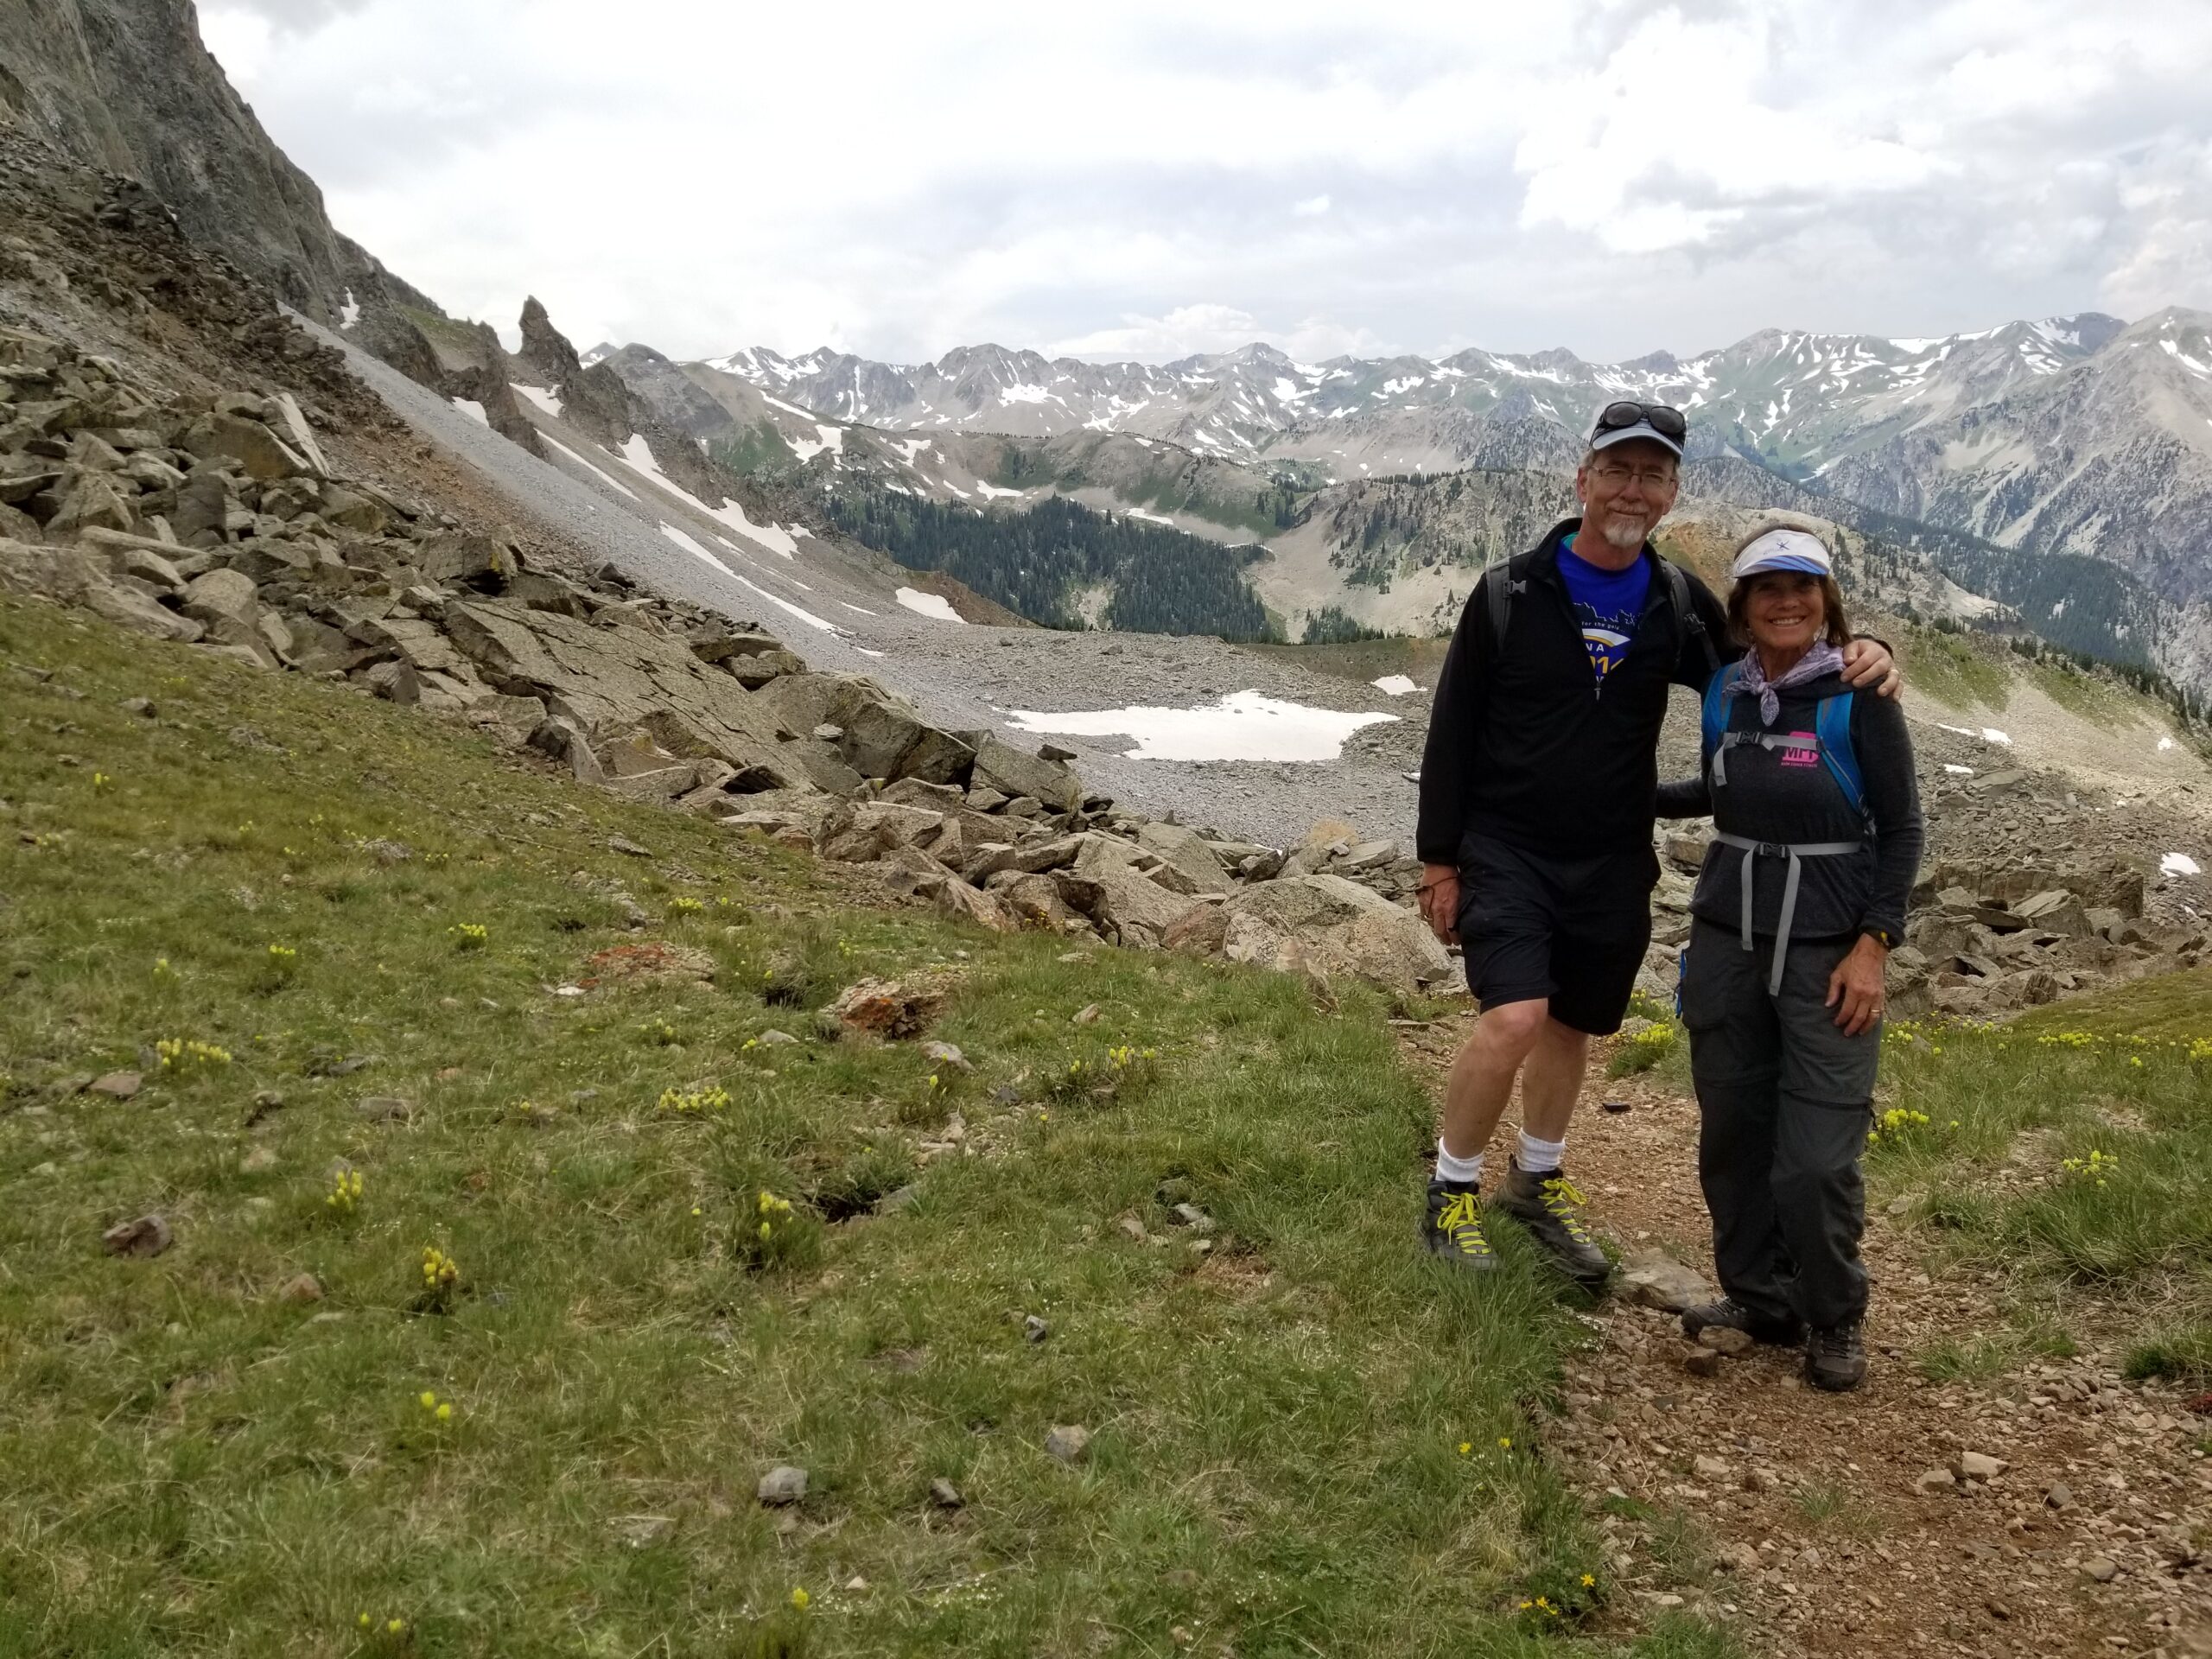 Two hikers standing on a rocky trail with mountainous terrain and scattered patches of snow in the background. Both are dressed in outdoor gear and smiling at the camera.